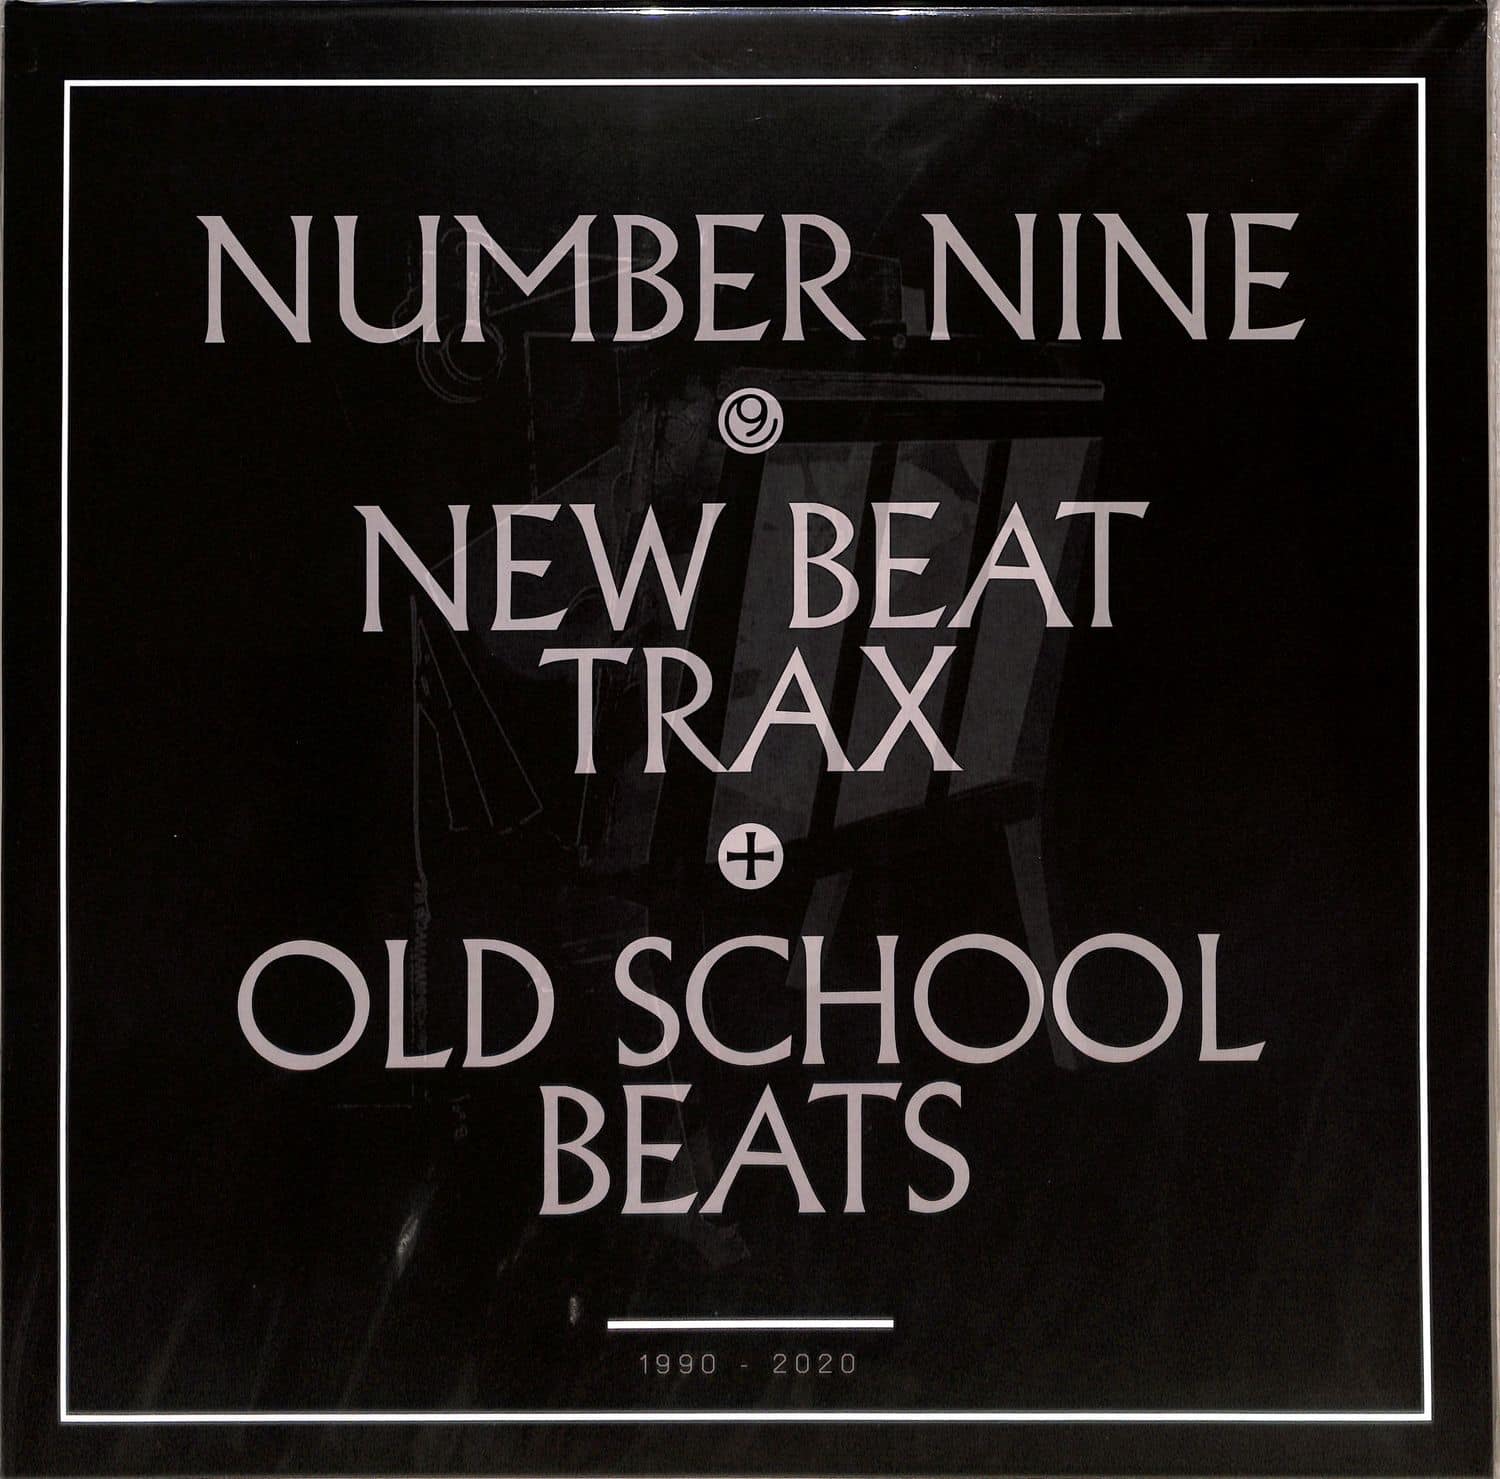 New Beat Trax + Old School Beats - A COMPILATION OF NUMBER NINE 